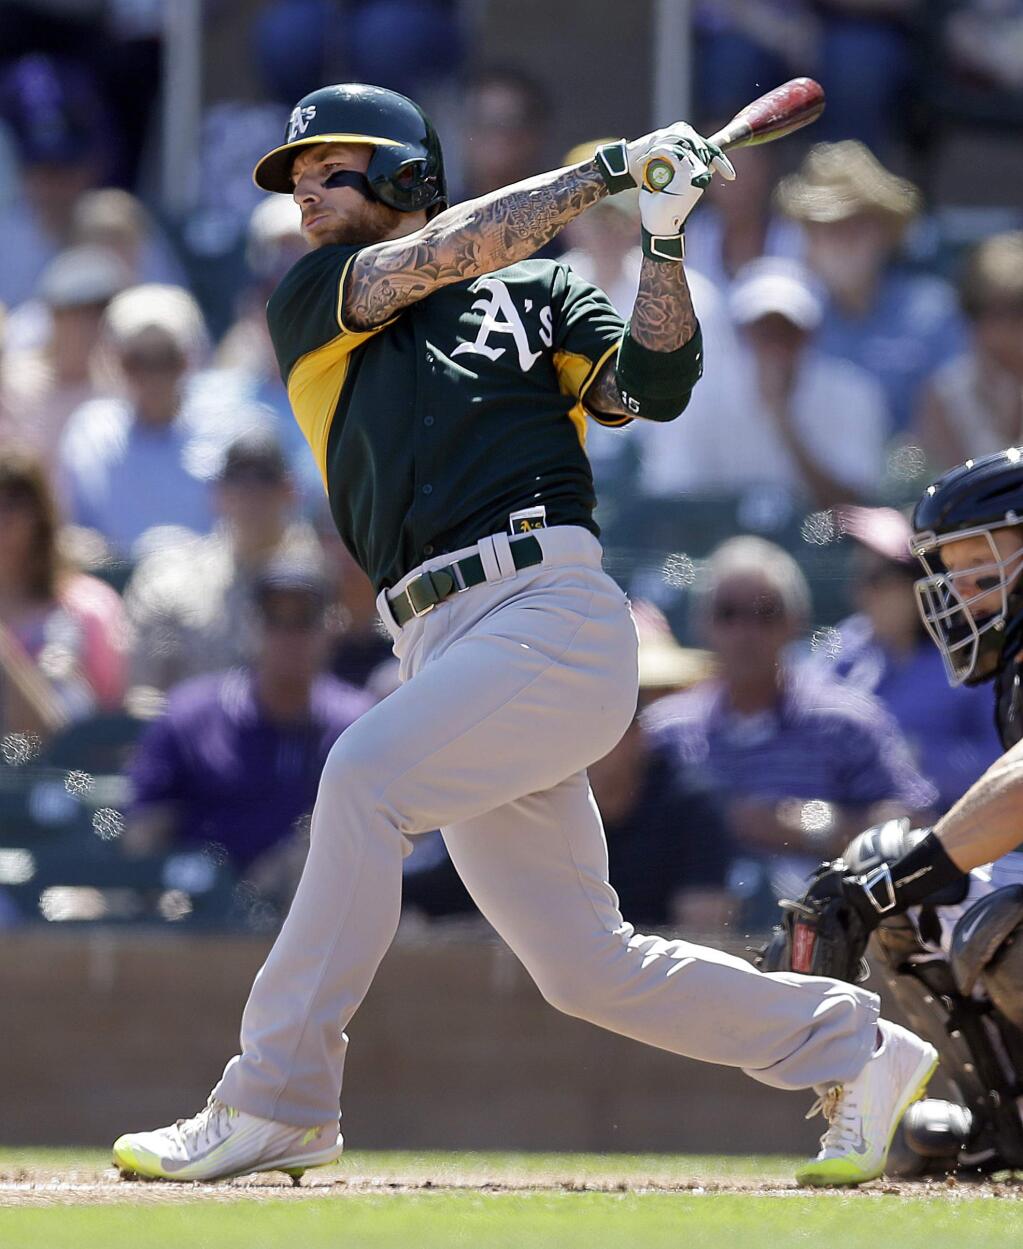 Oakland Athletics' Brett Lawrie fouls off a pitch against the Colorado Rockies in the first inning of a spring training exhibition baseball game Friday, March 20, 2015, in Scottsdale, Ariz. (AP Photo/Ben Margot)